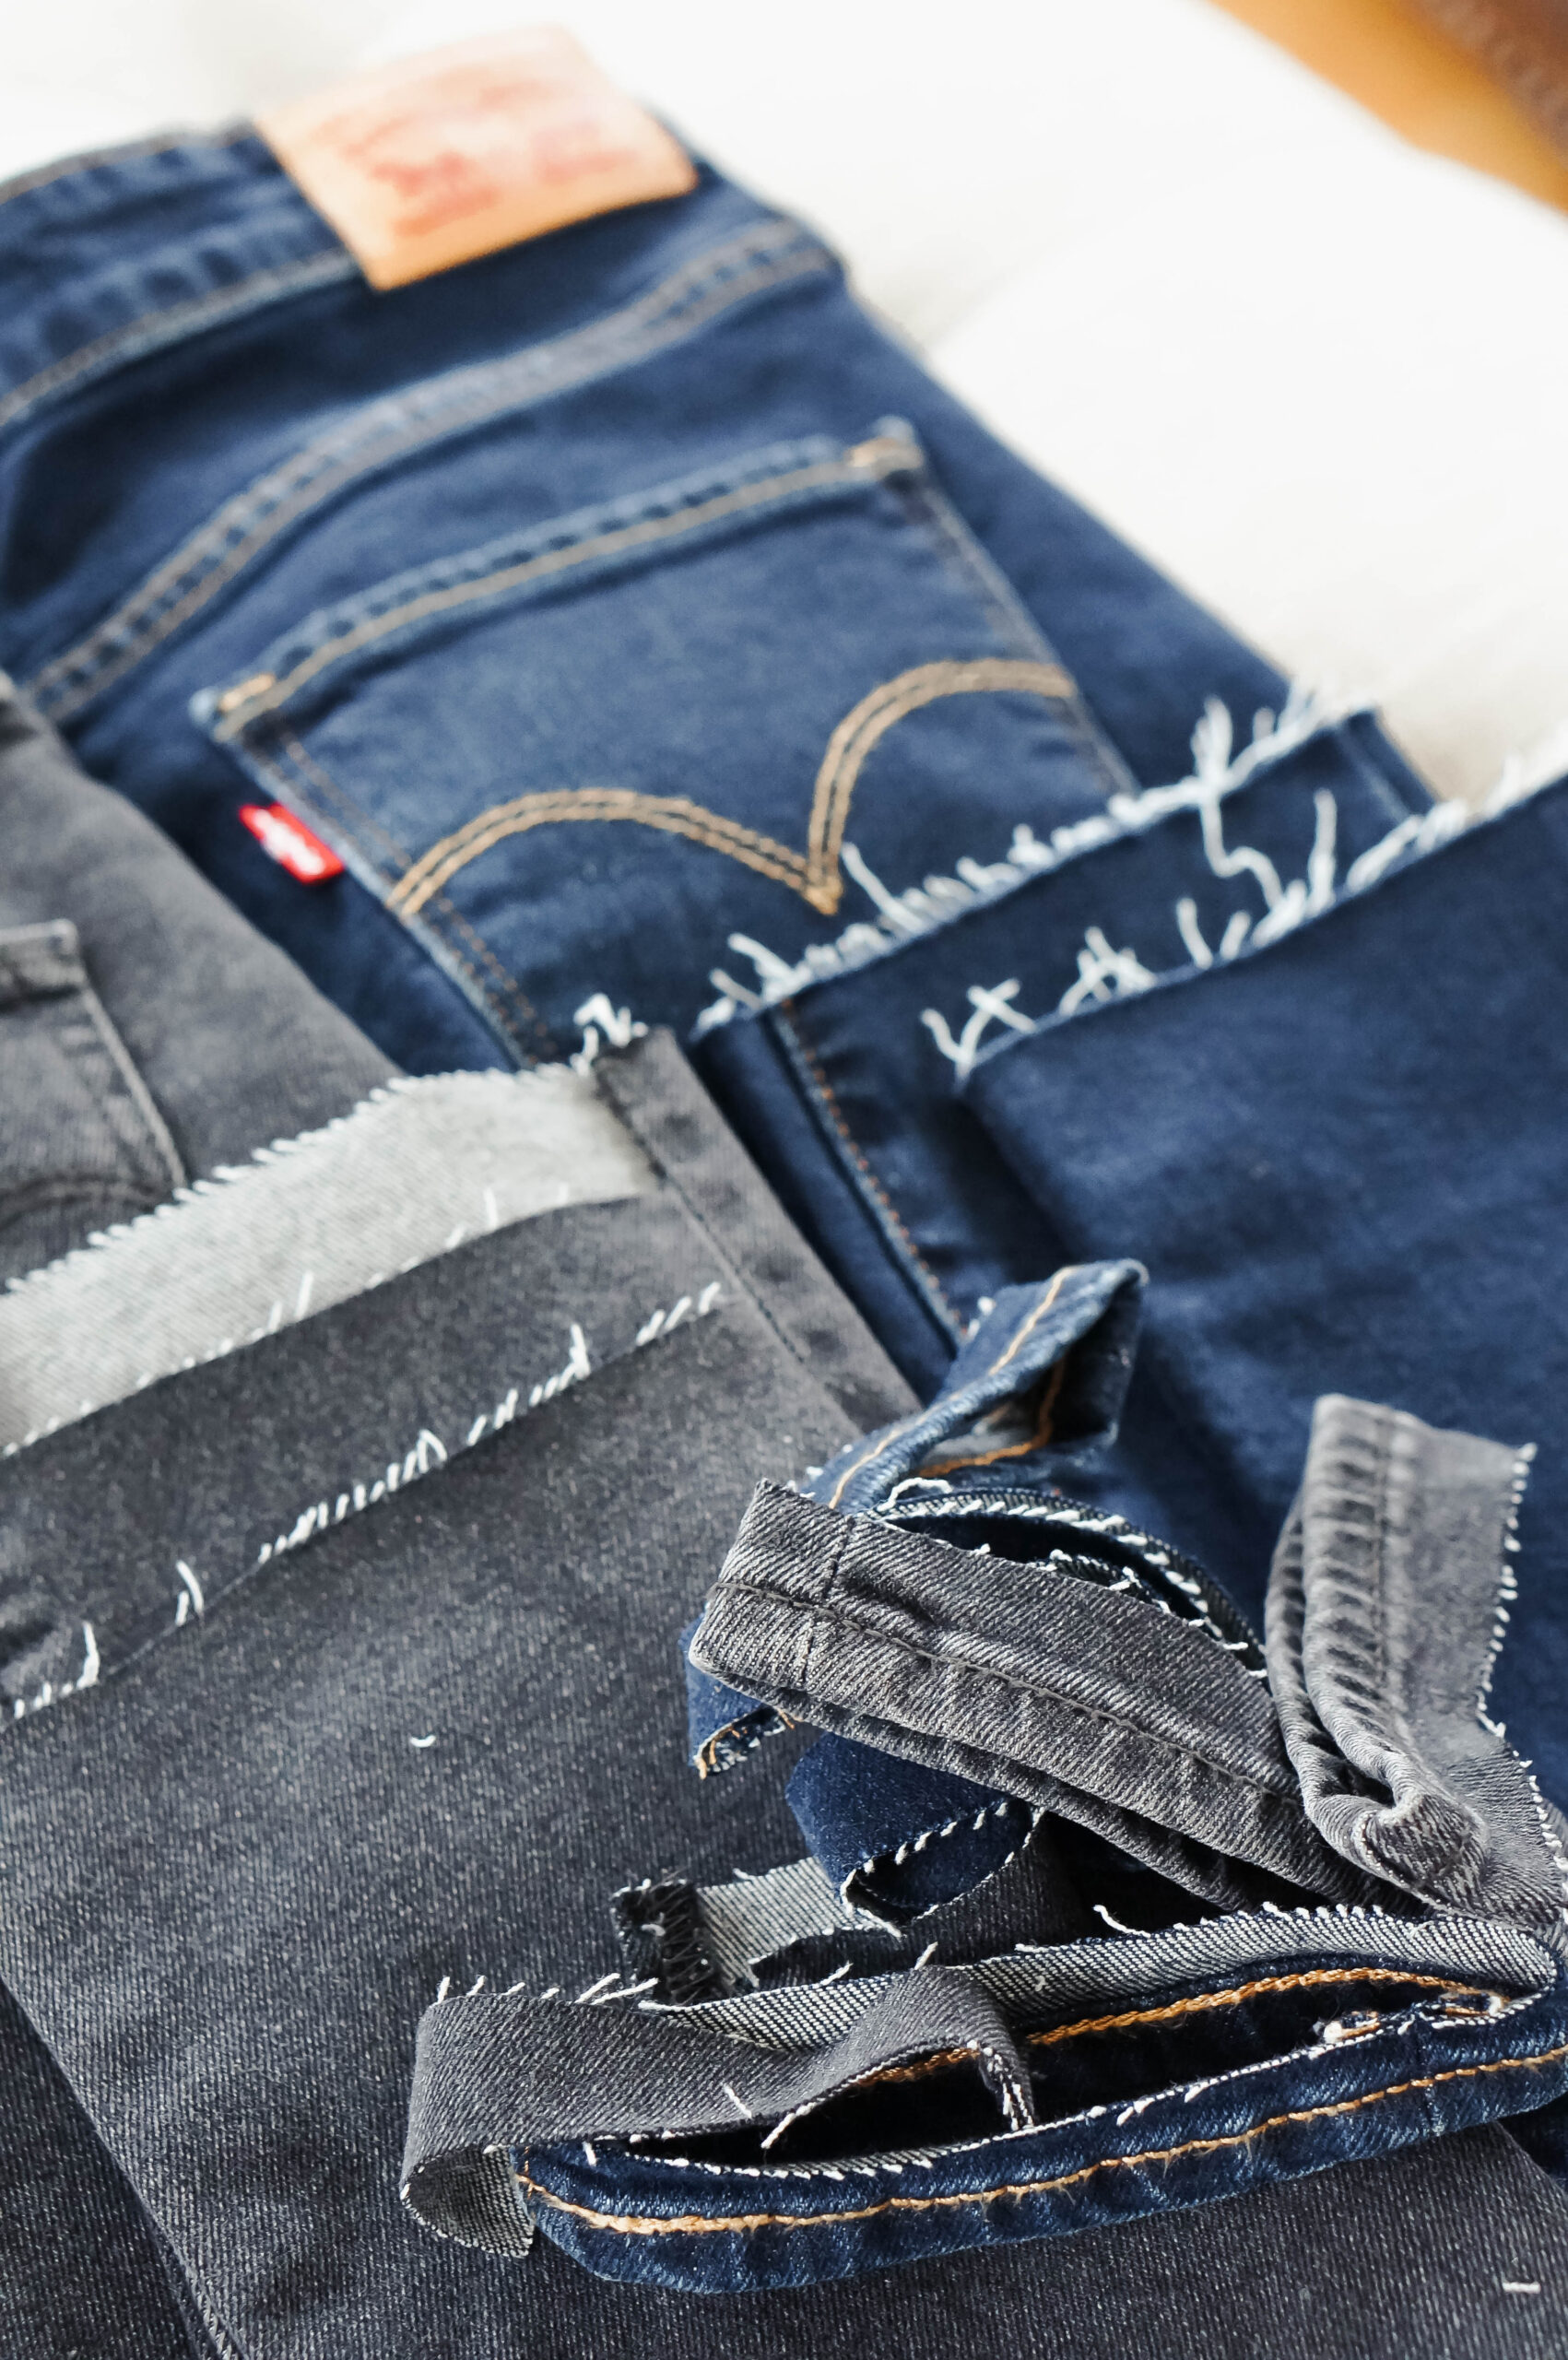 5 DIY com Jeans » STEAL THE LOOK